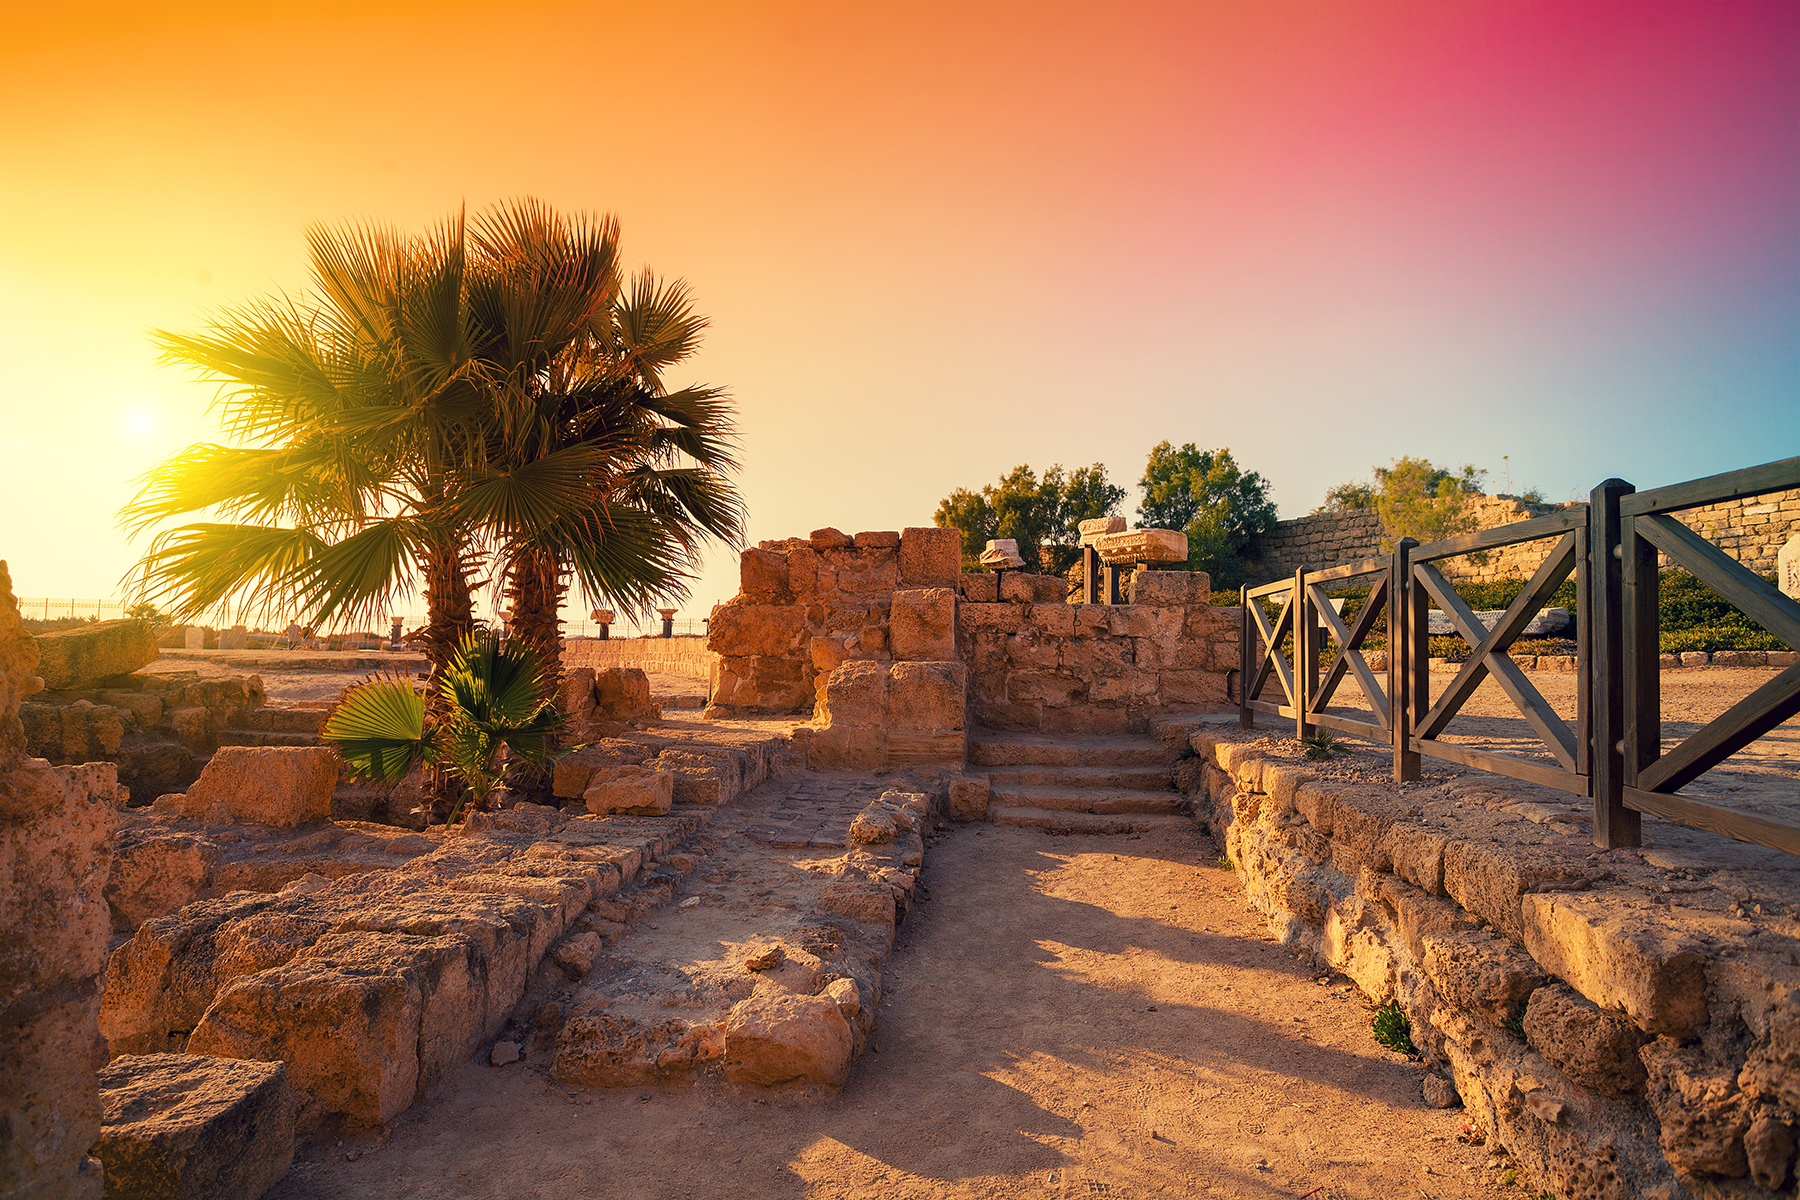 Palm tree on the left, with parts of ancient building viewable, and a beautiful yellow, orange, and red sunset. 